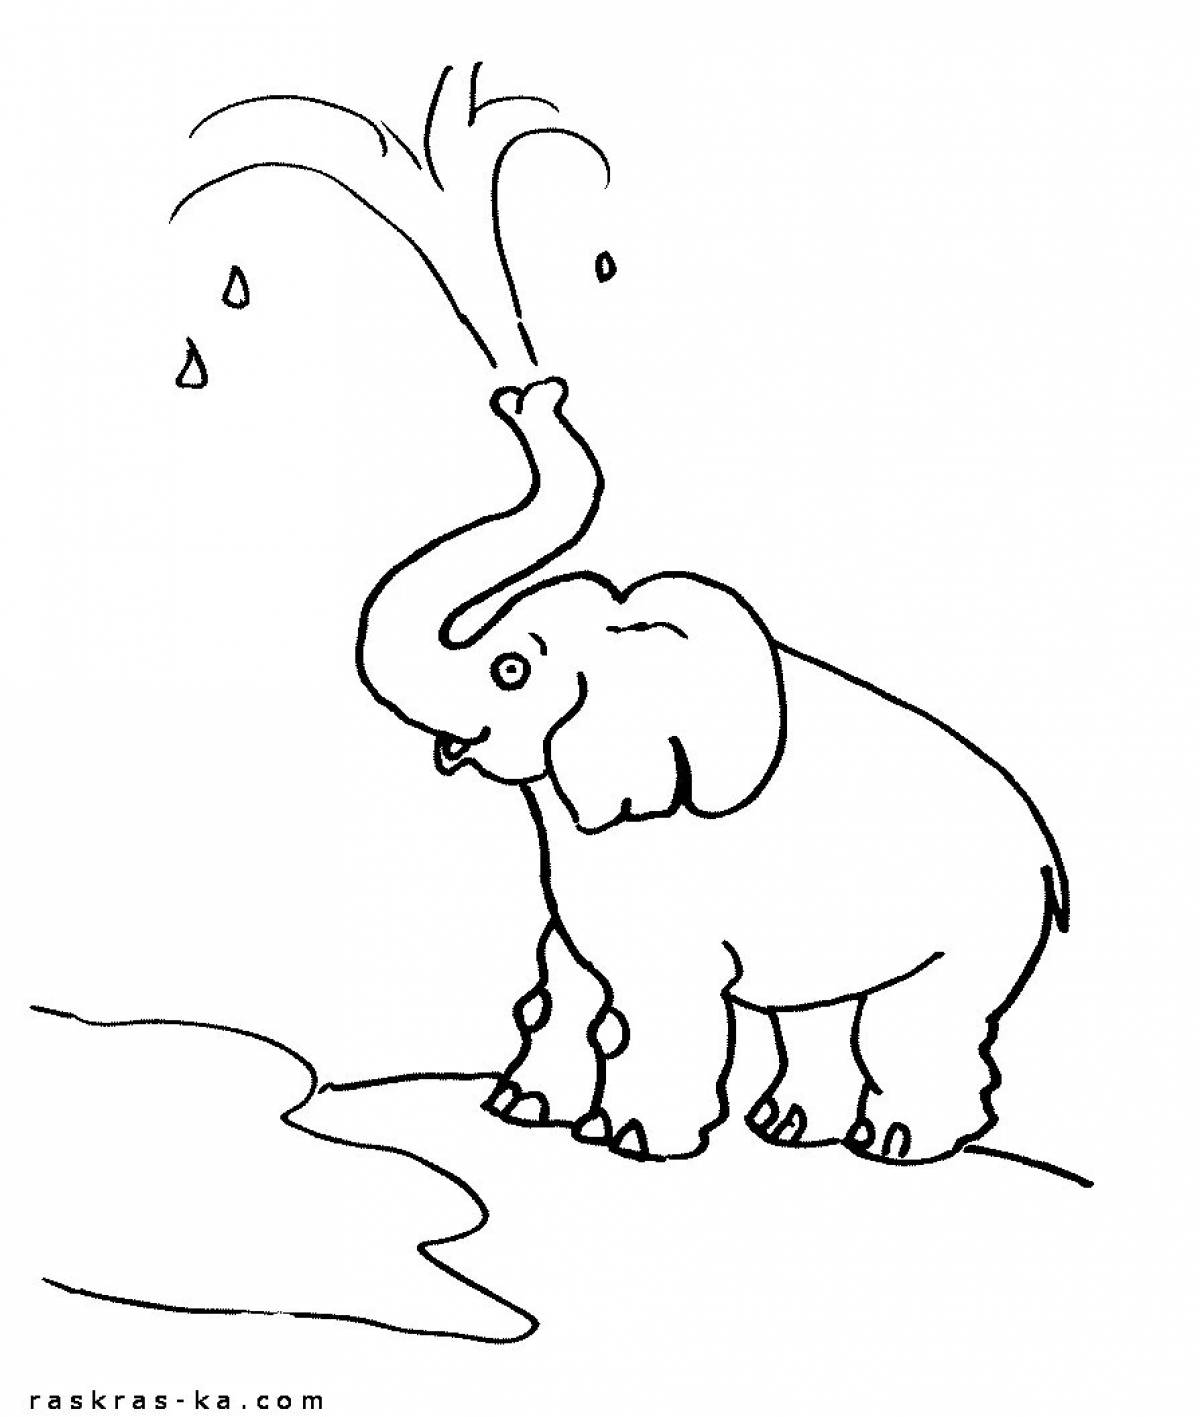 Royal elephant coloring page